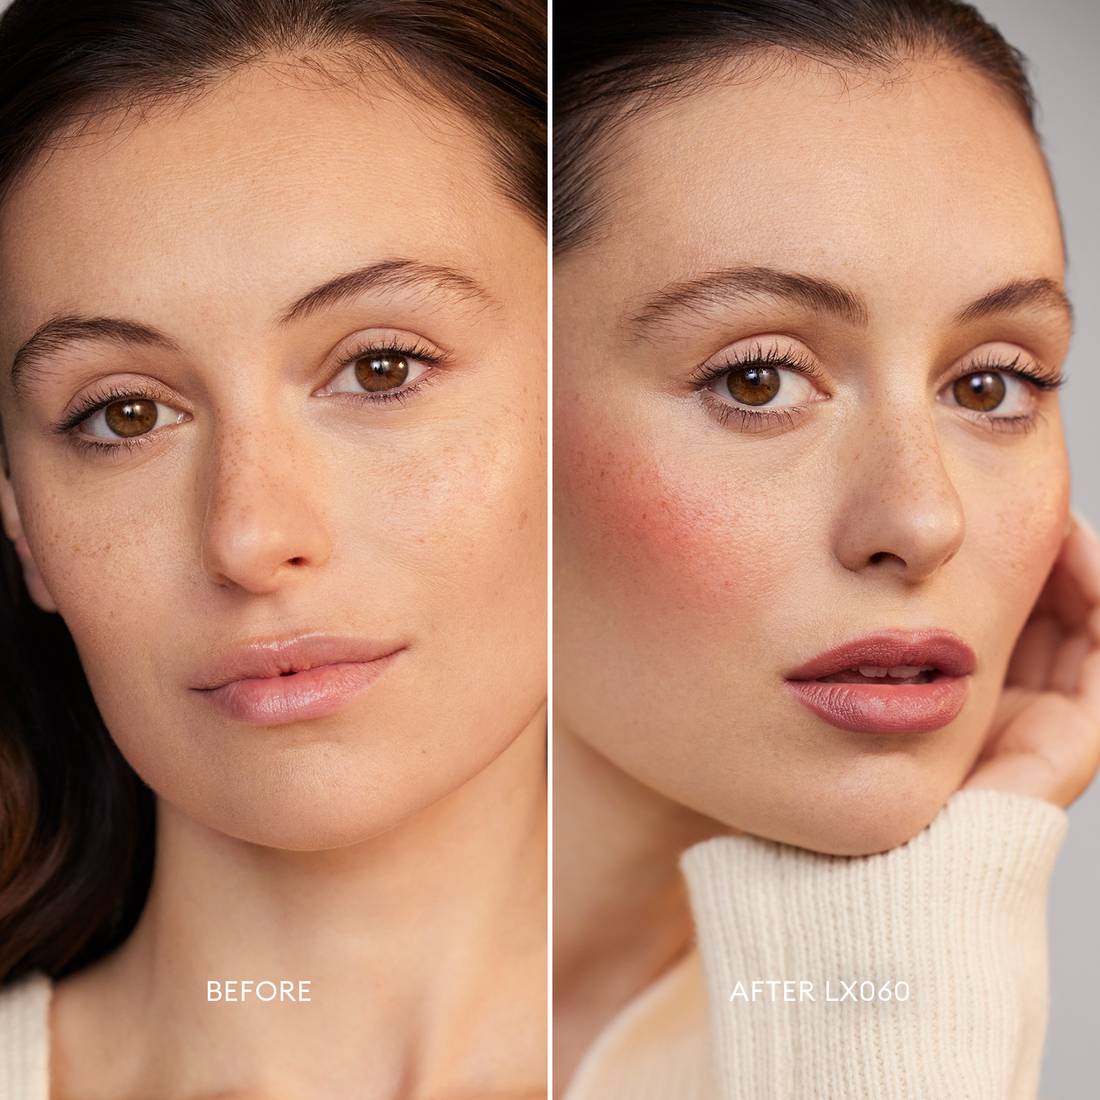 Before and after image of a Medium Skin Tone, Peach Undertone model wearing Softlight Luminous Hydrating Concealer in shade 060. 3